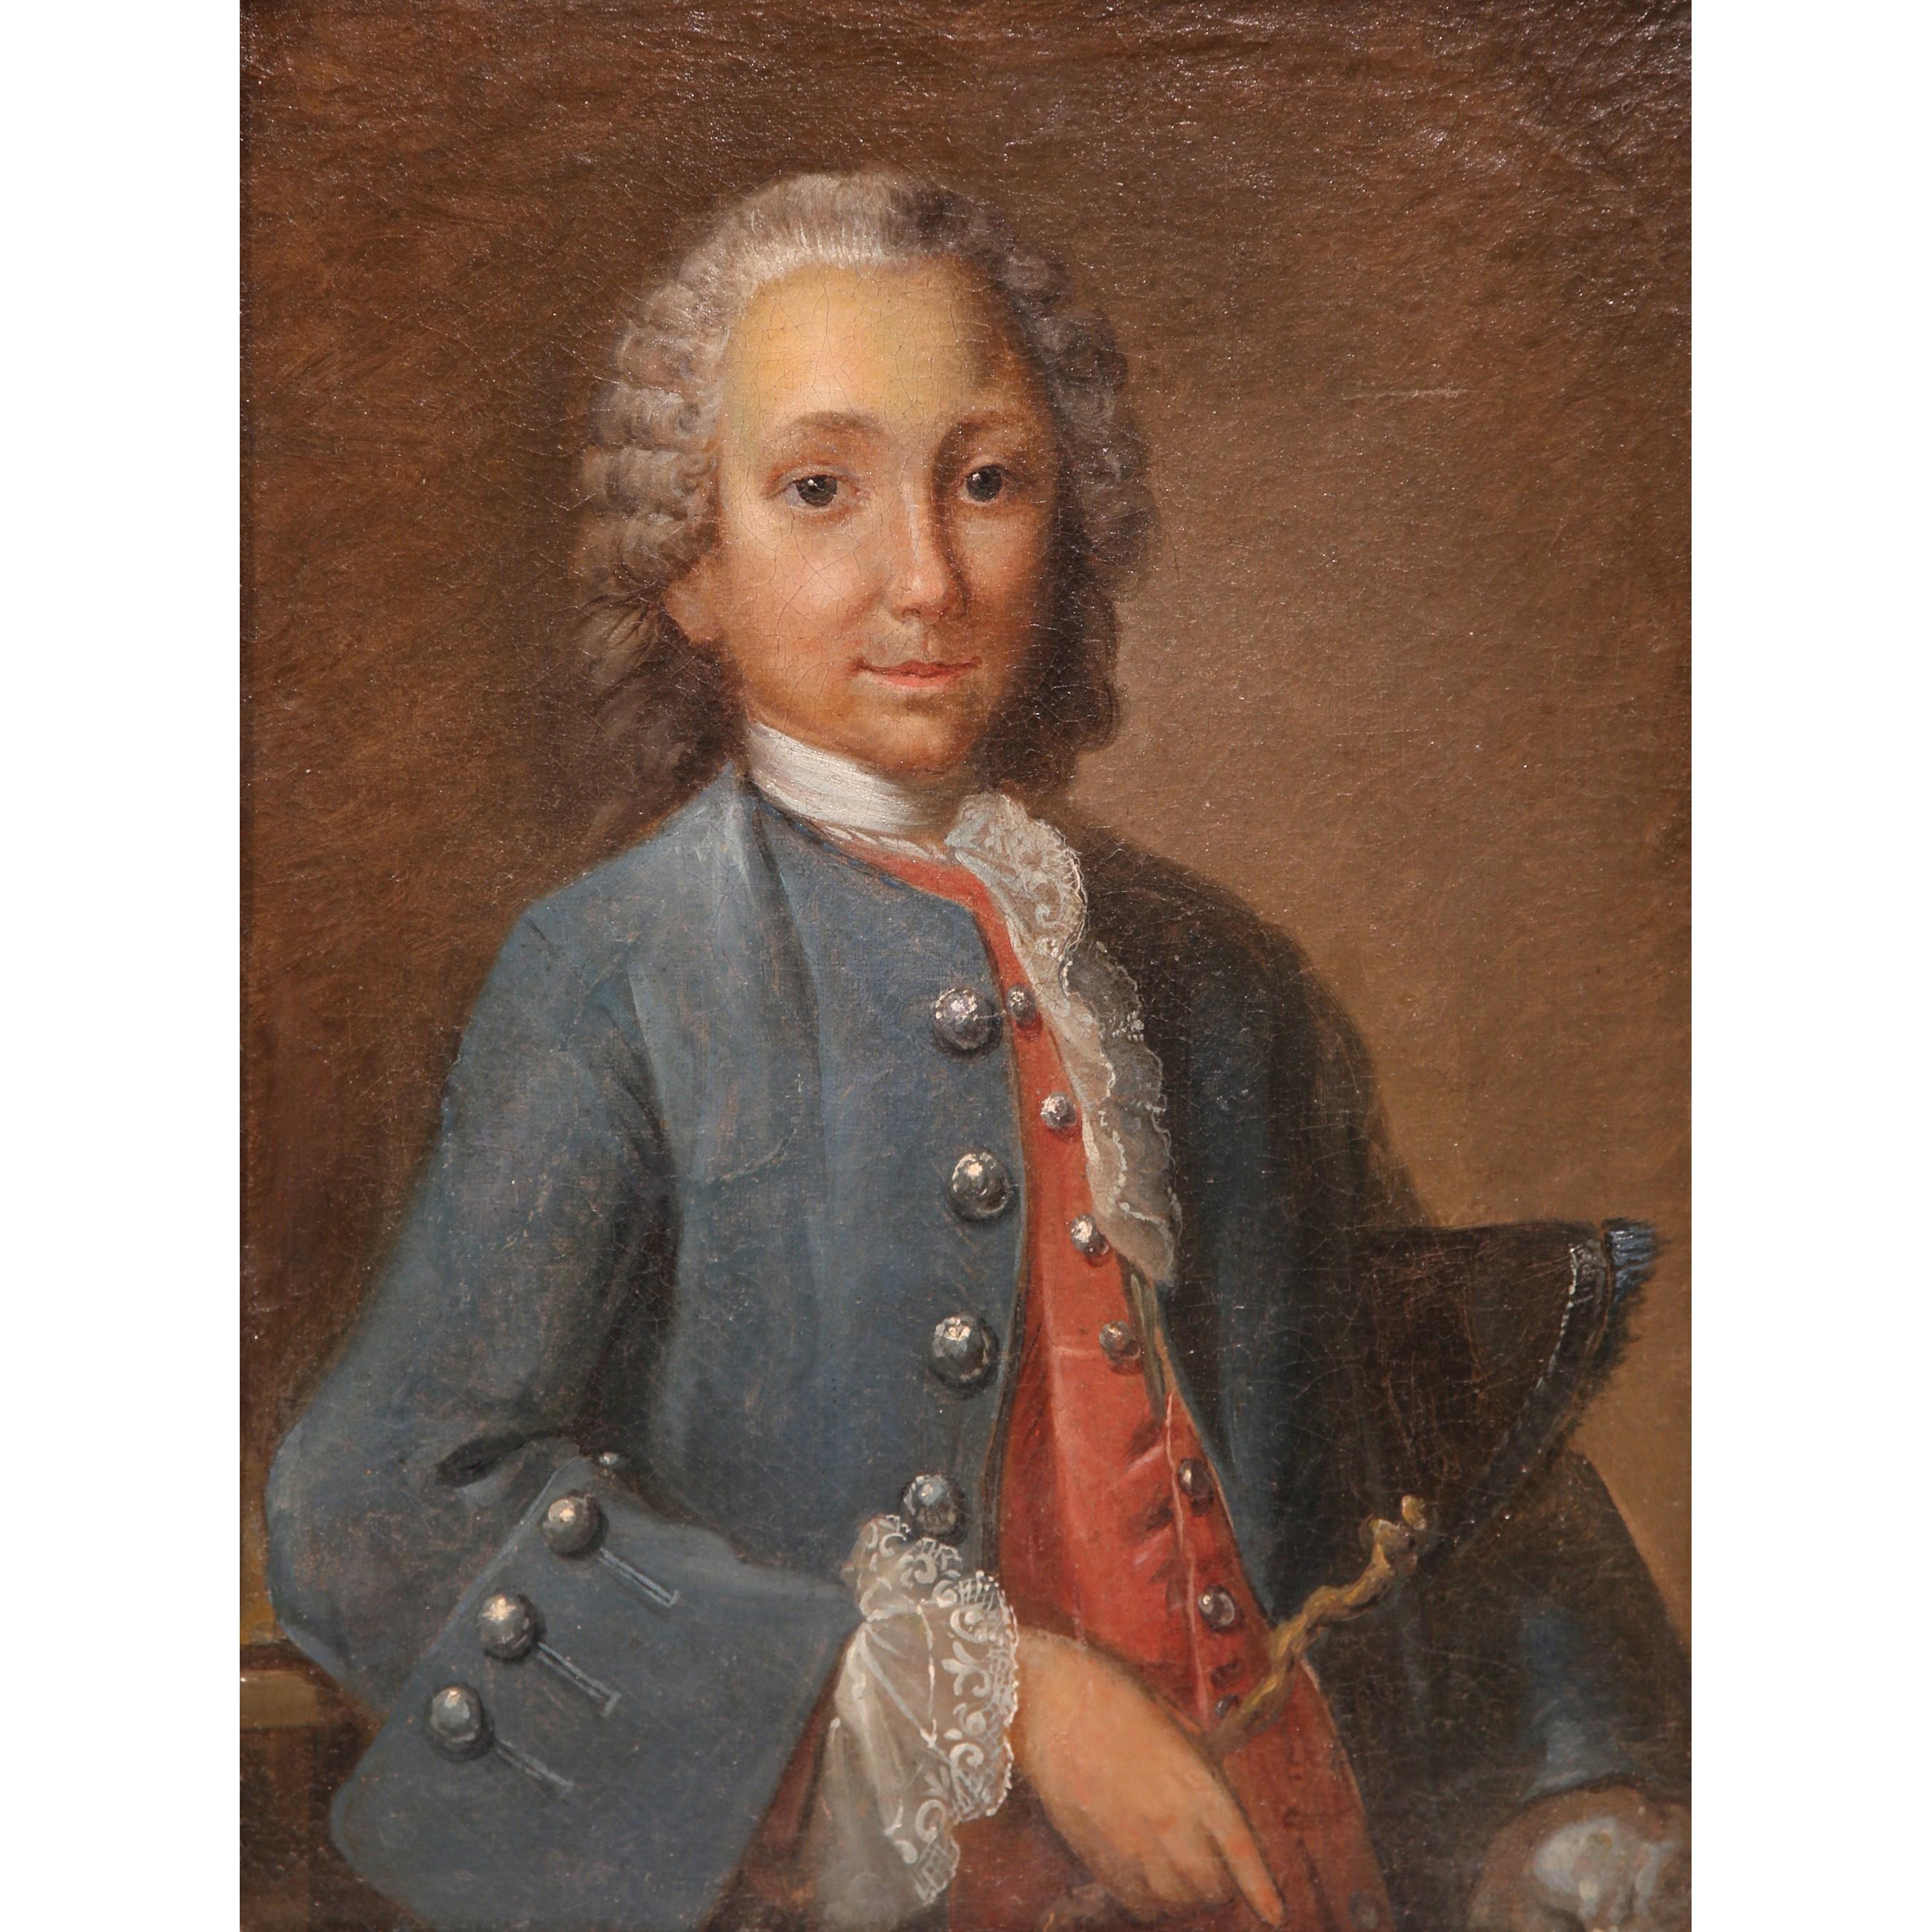 This beautiful antique oil on canvas was created in Paris, France circa 1760. Set in the original carved gilt frame, the portrait depicts the Marquis de Rochambeau dressed in formal clothing. The composition has fine, colorful details throughout the